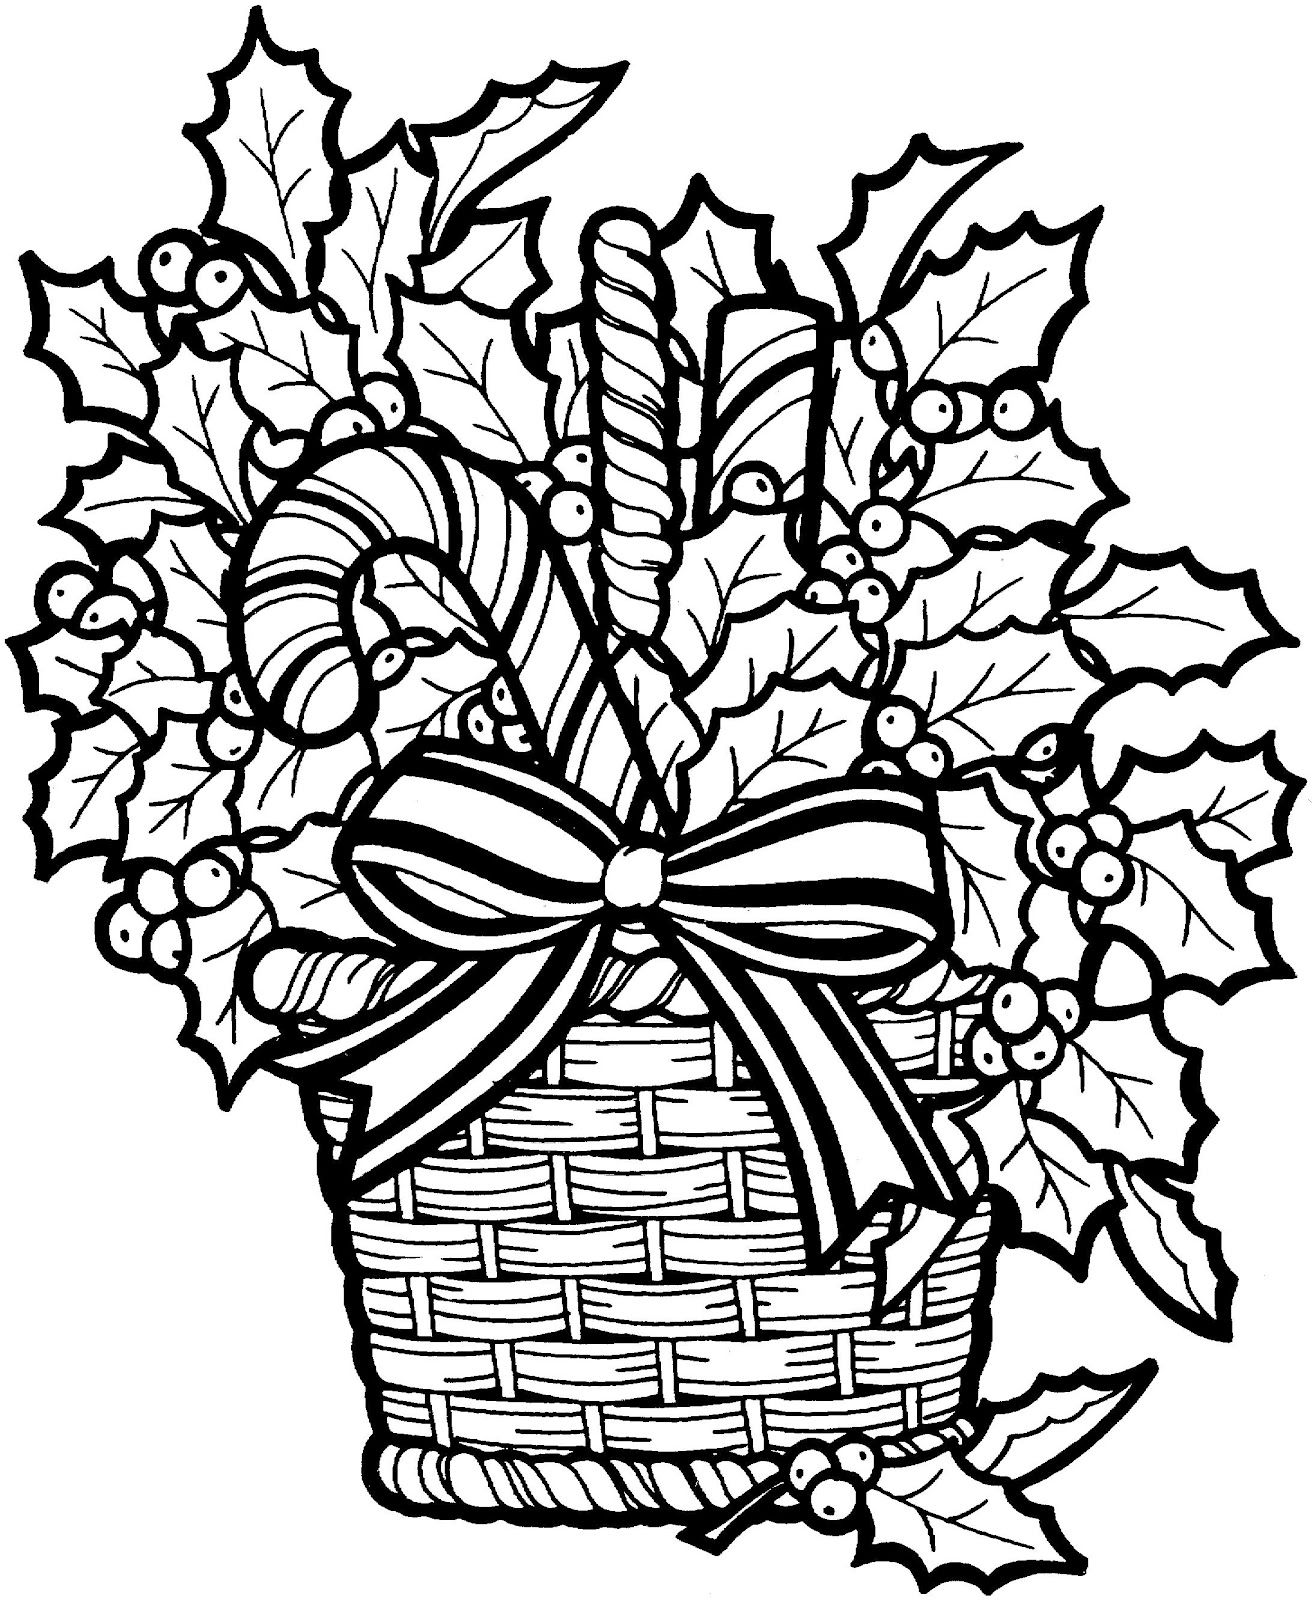 Free Christmas Picture Black And White, Download Free Clip Art, Free Clip Art on Clipart Library